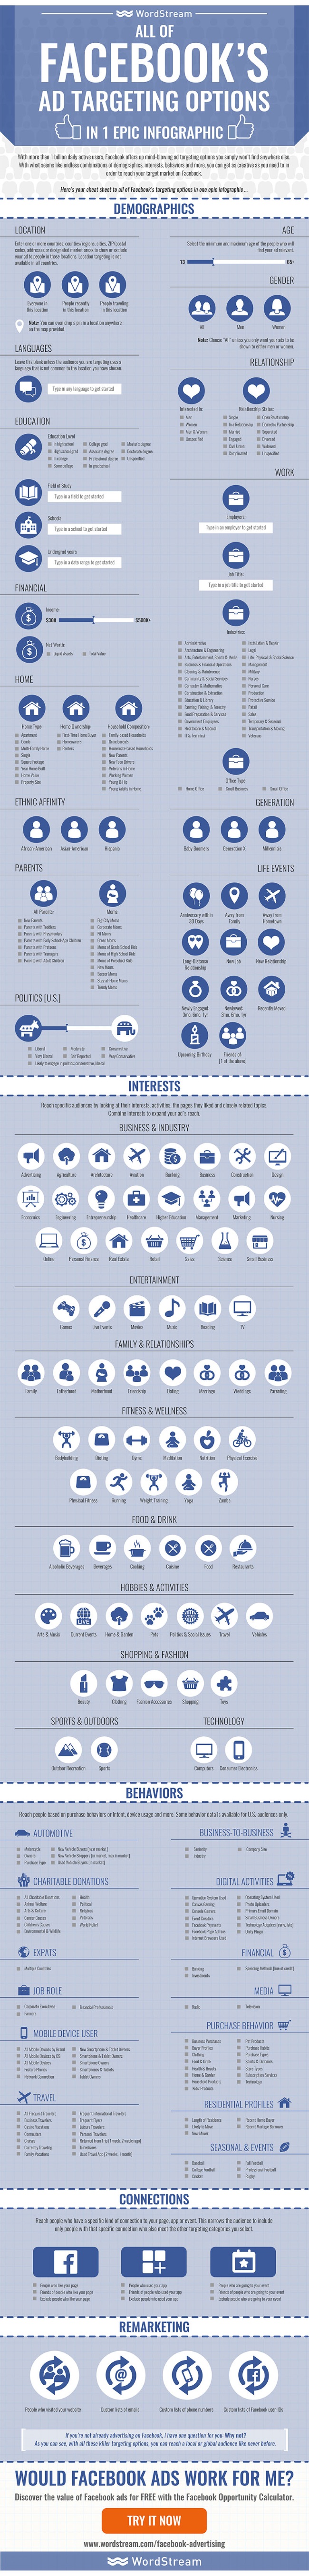 All of Facebook’s Ad Targeting Options [Infographic]